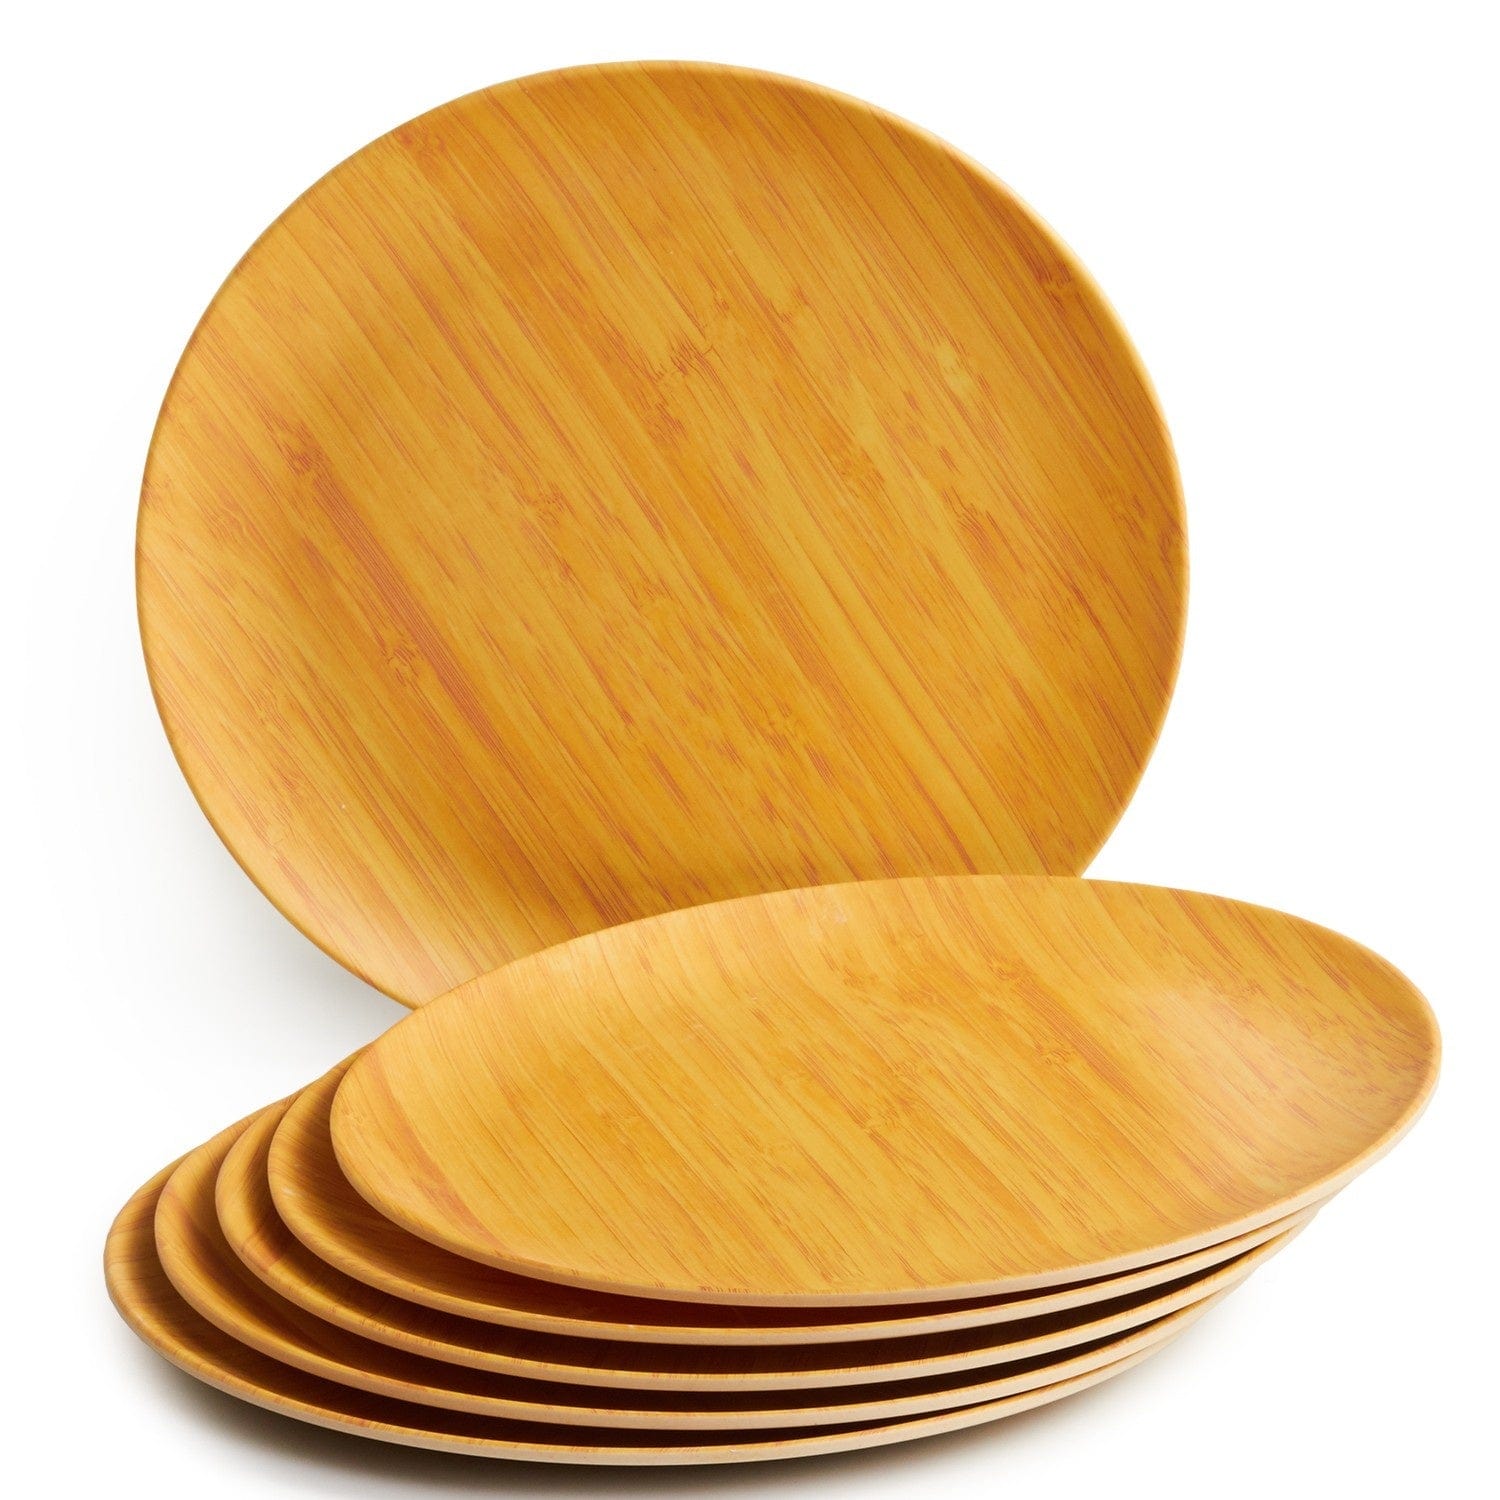 Red Butler Dinner Plates Bamboo Fibre Plate 11 inches | 6pcs Set | Wooden Design BP11A4 Daily-Use Eco-Friendly Bamboo Fiber Dinner Plate Stylish & Sustainable Redbutler